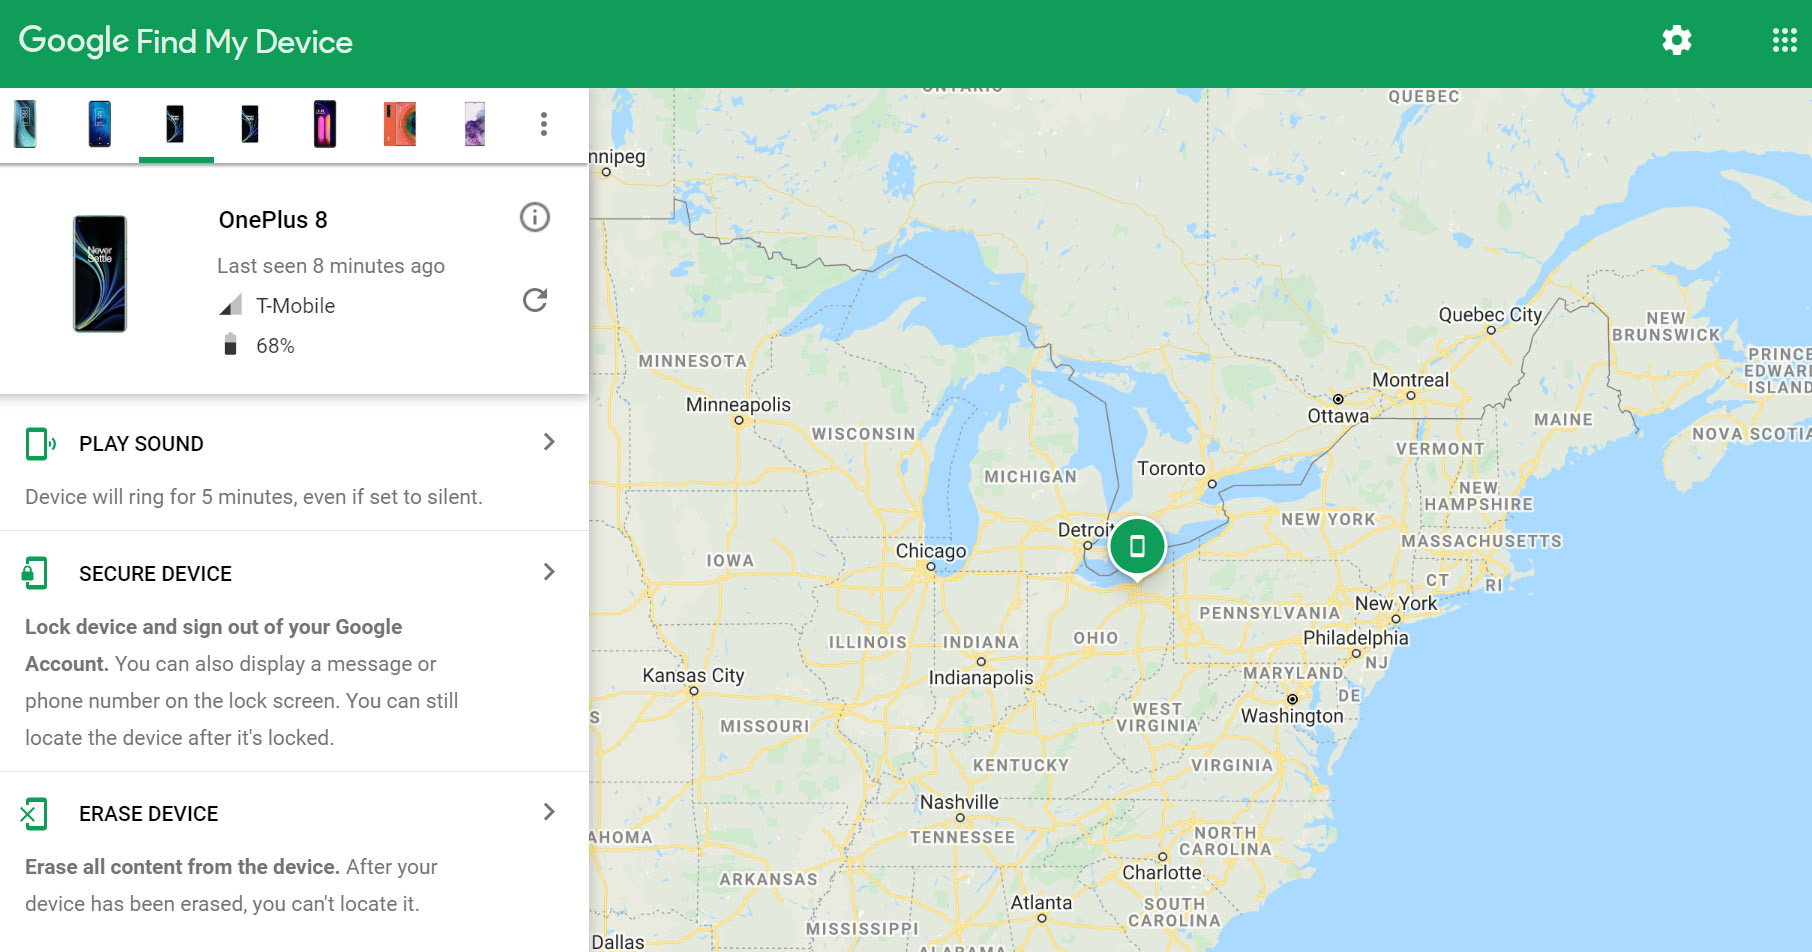 Pixel buds pro find my device location not showing - Google Pixel Buds  Community